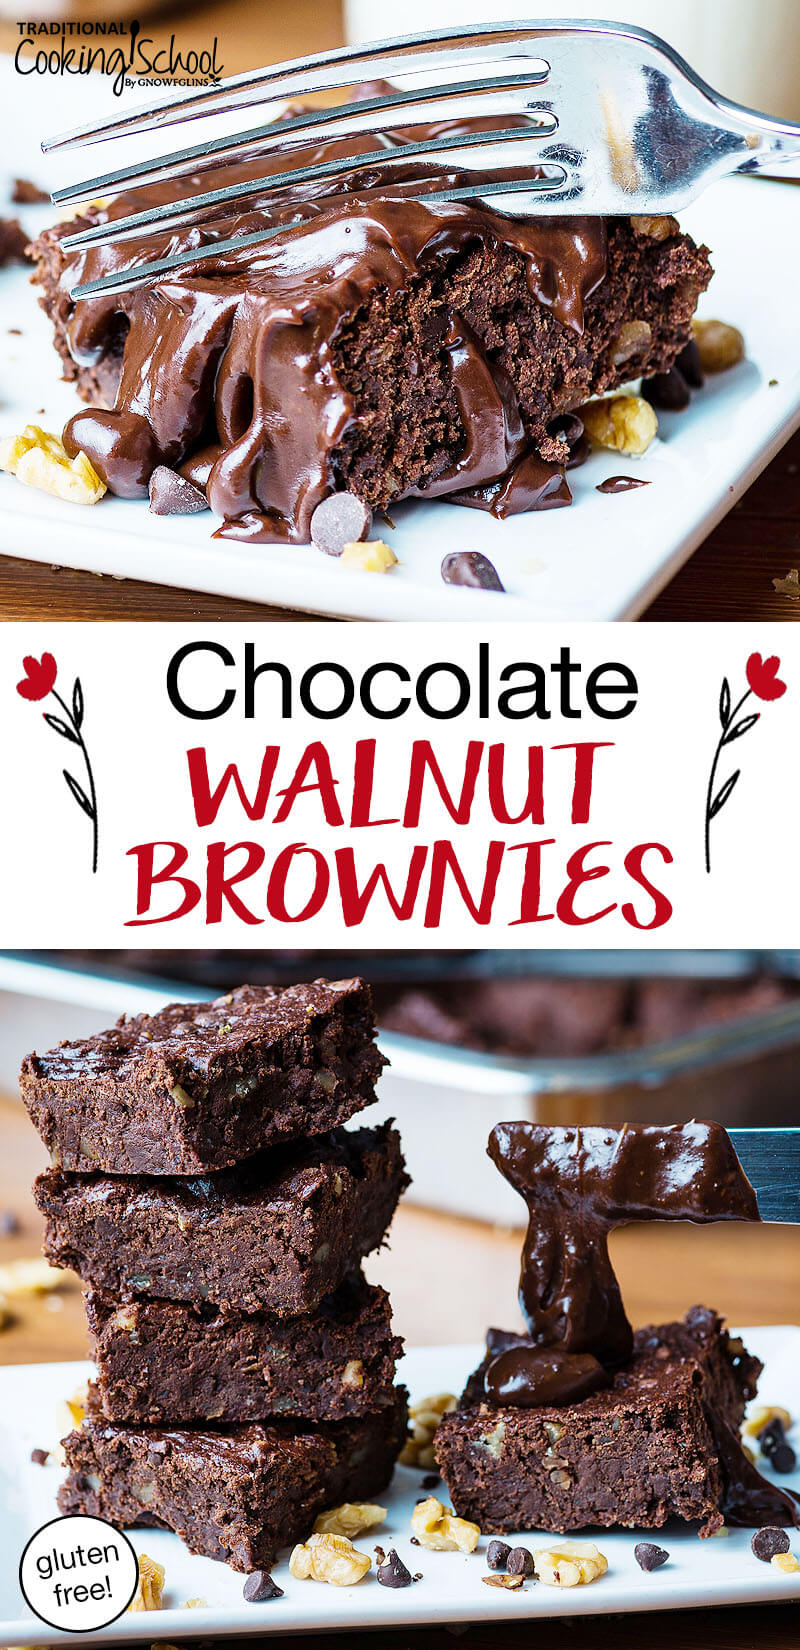 photo collage of gluten-free brownies with text overlay: "Chocolate Walnut Brownies (gluten-free!)"